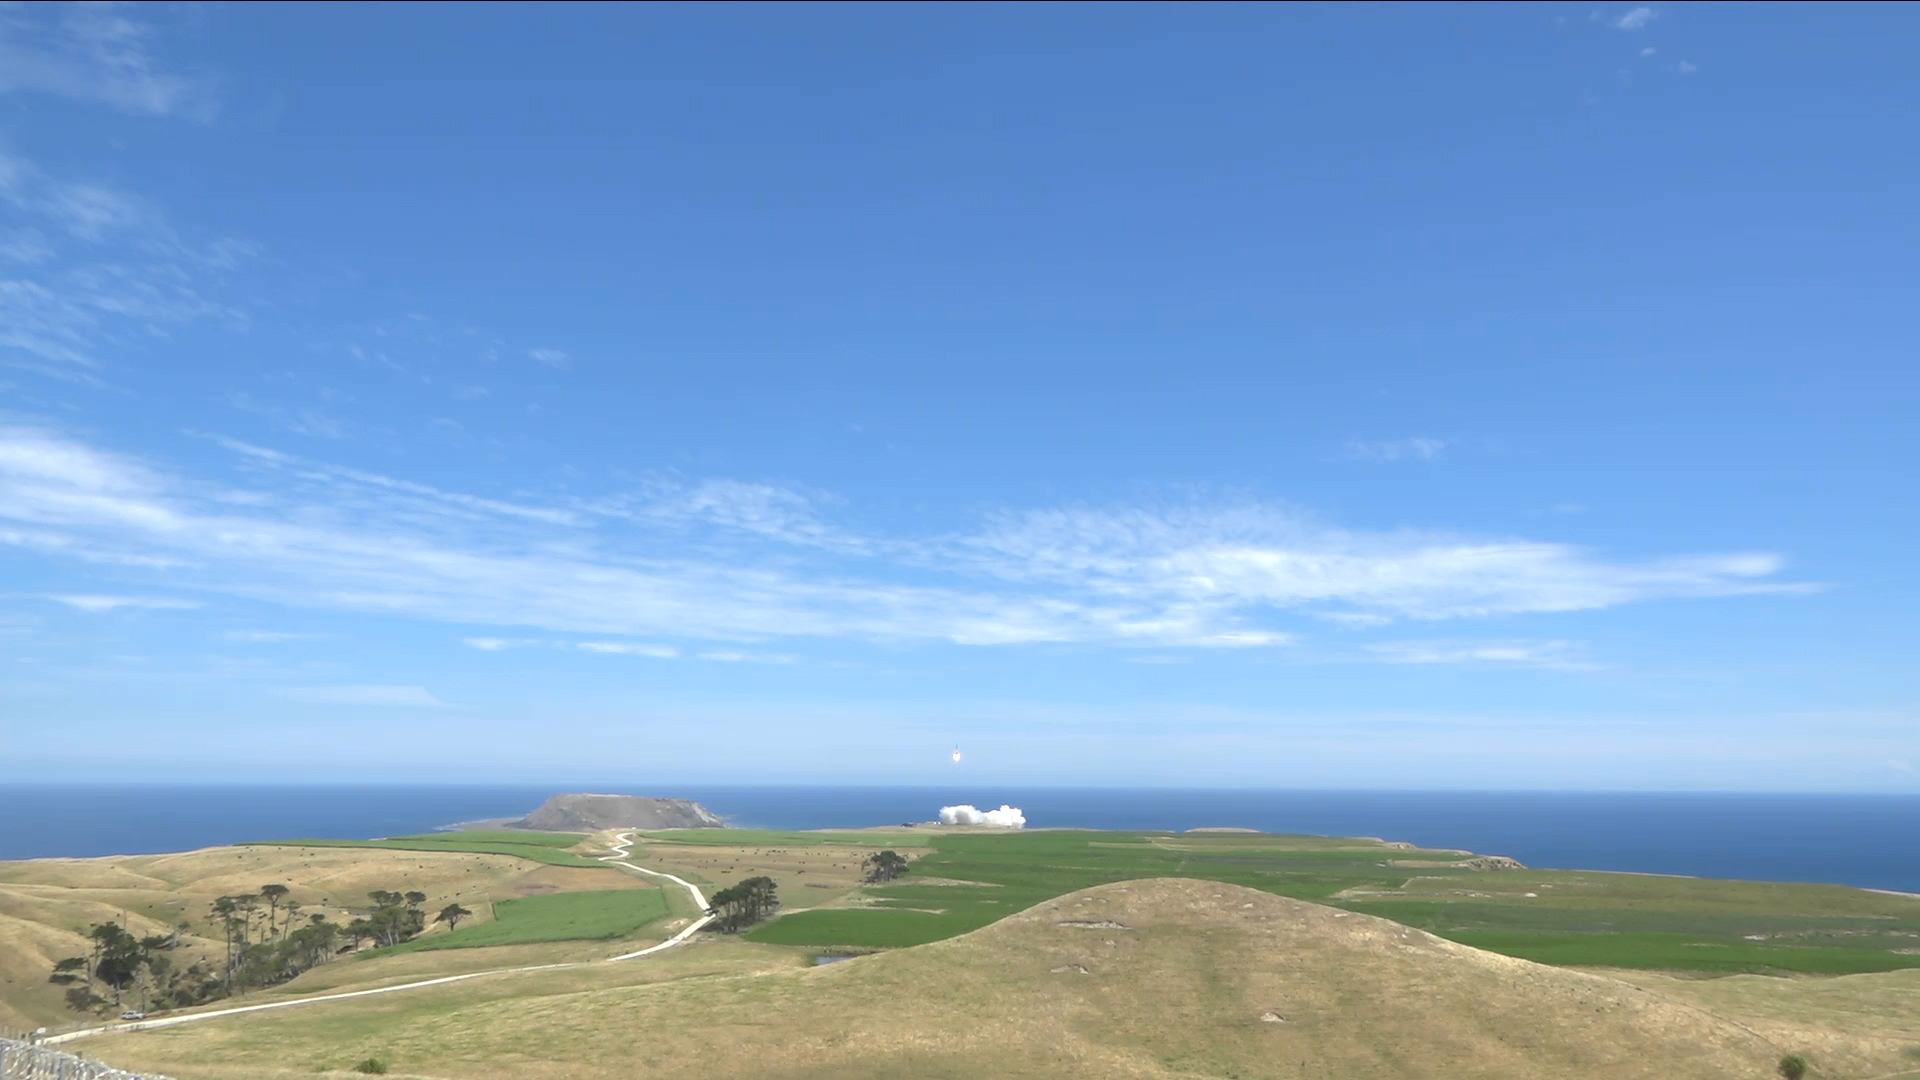 Rocket Lab Electron flight 'Still Testing' takes off from LC-1